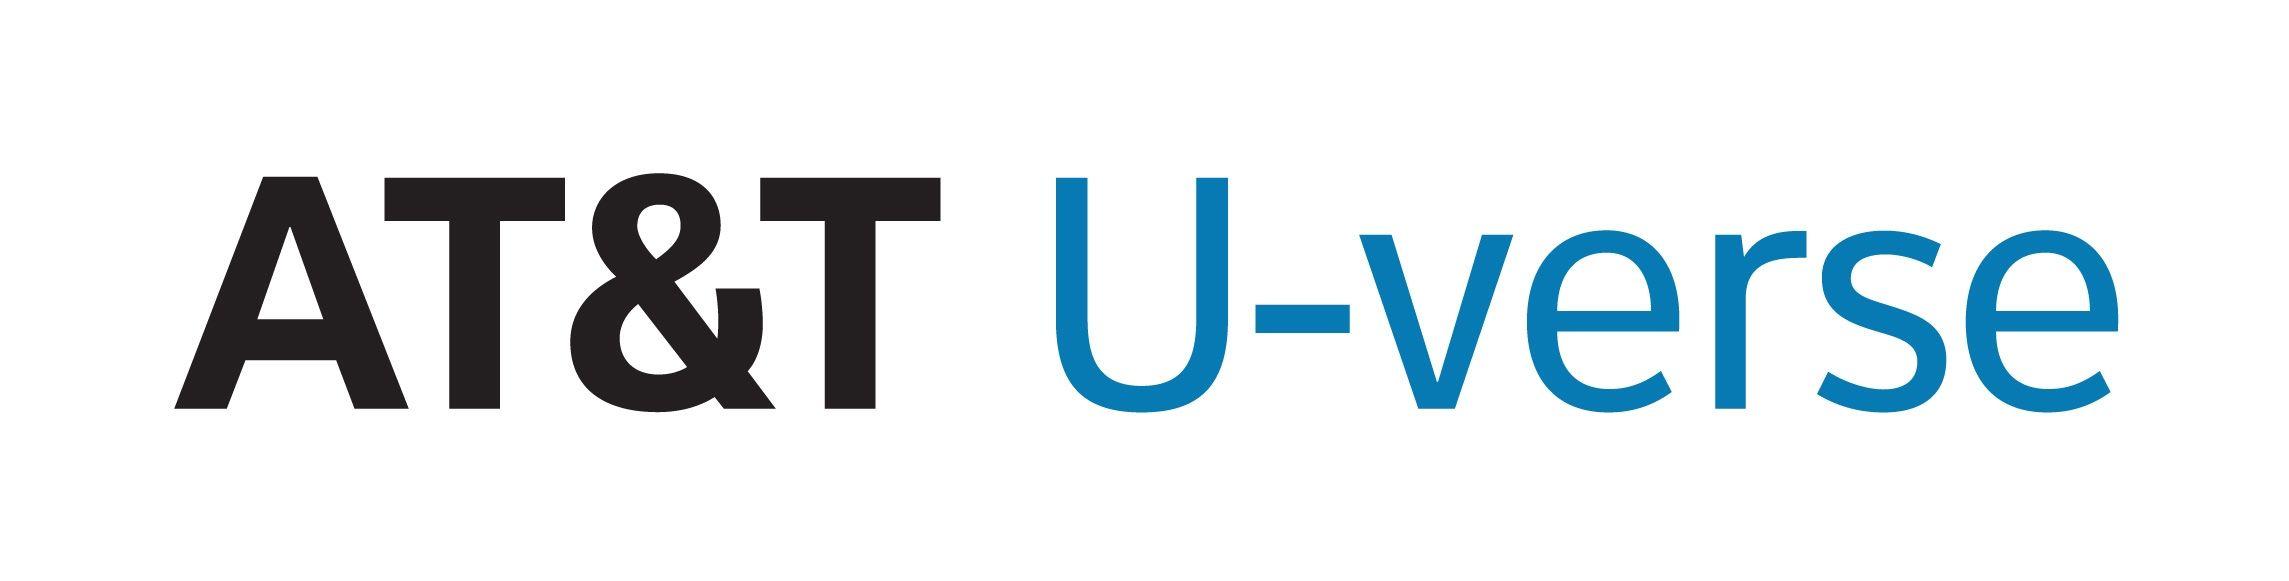 U-verse Logo - AT&T Uverse Internet 18 mbps, $28/month for a year - Slickdeals.net